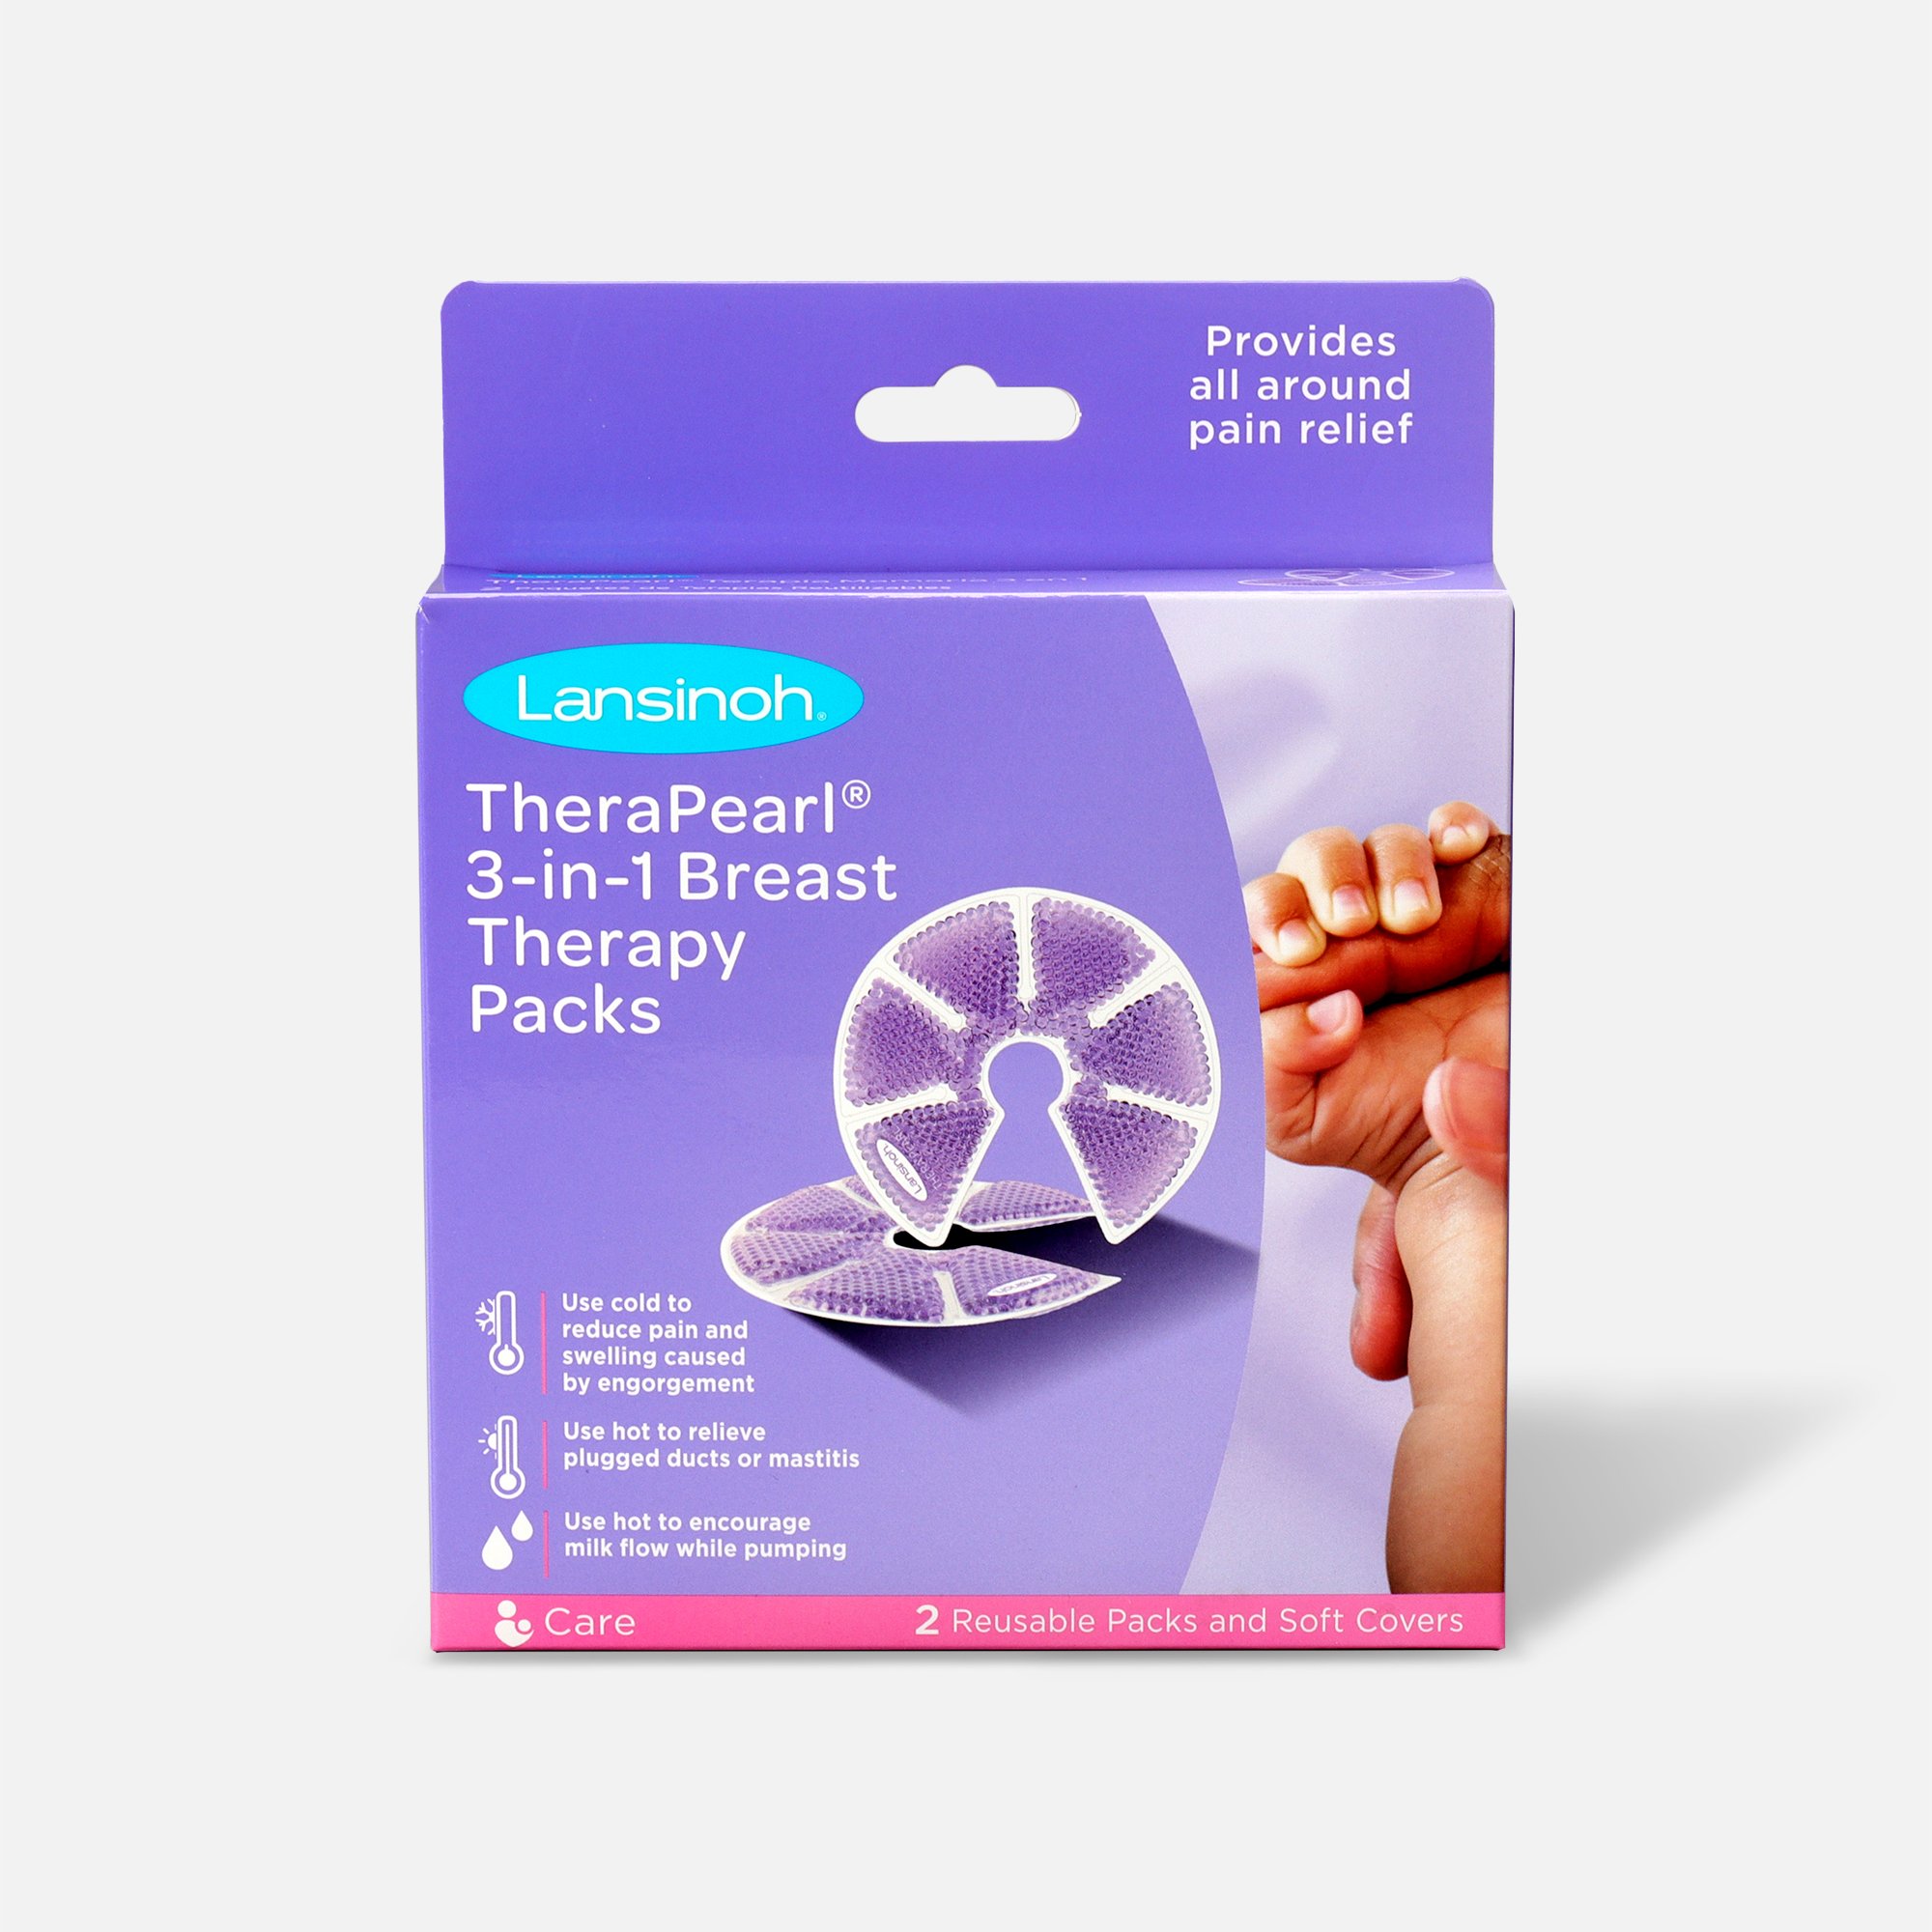 https://hsastore.com/on/demandware.static/-/Sites-hec-master/default/dw18e172de/images/large/lansinoh-therapearl-3-in-1-hot-or-cold-breast-therapy-25244-1.jpg